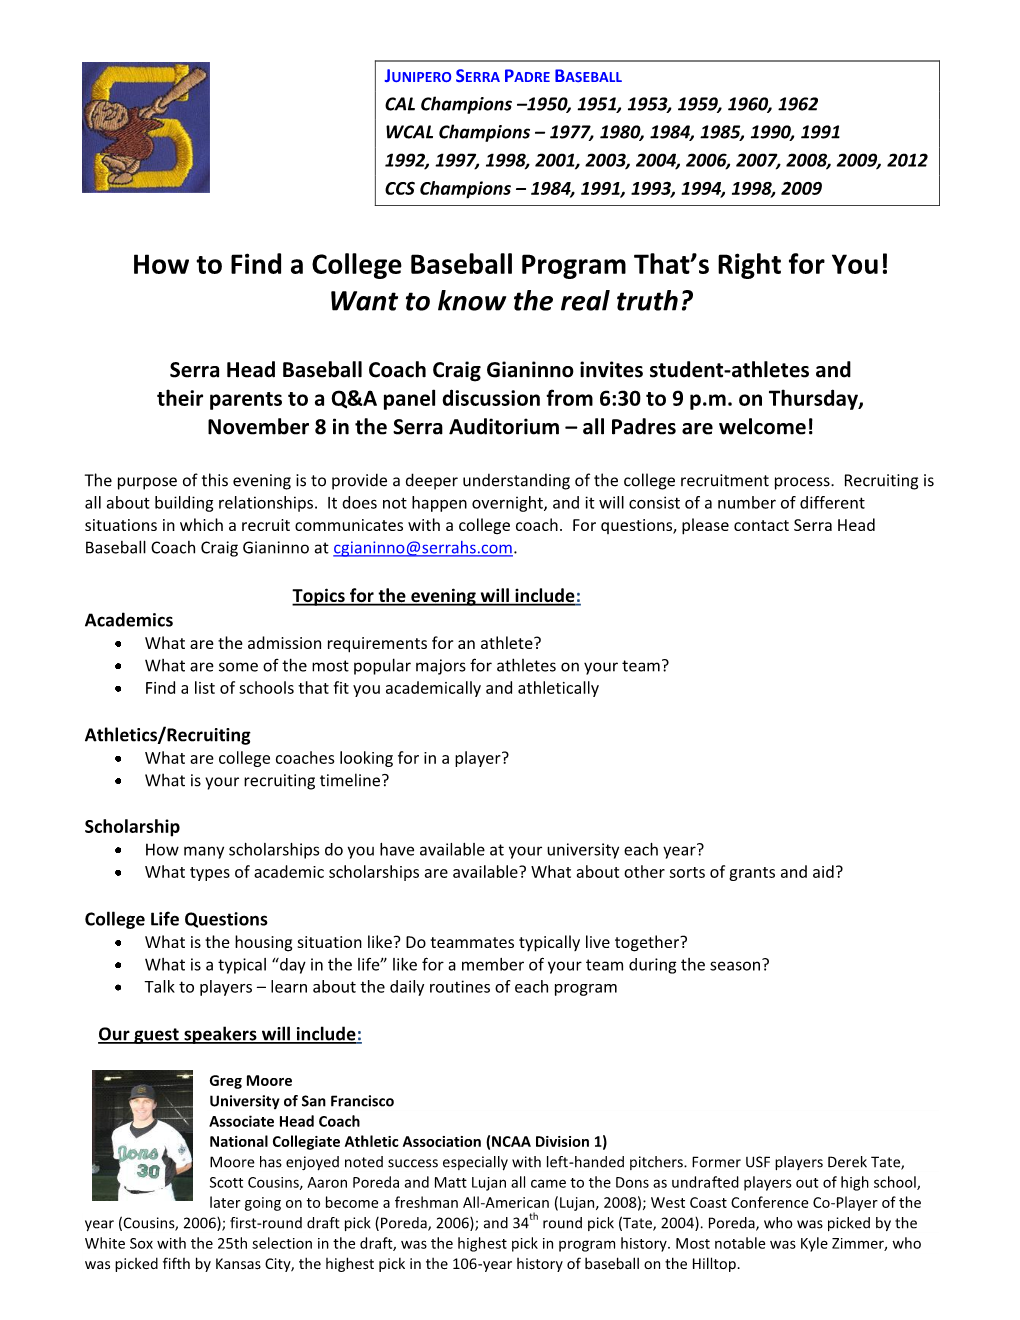 How to Find a College Baseball Program That's Right for You! Want